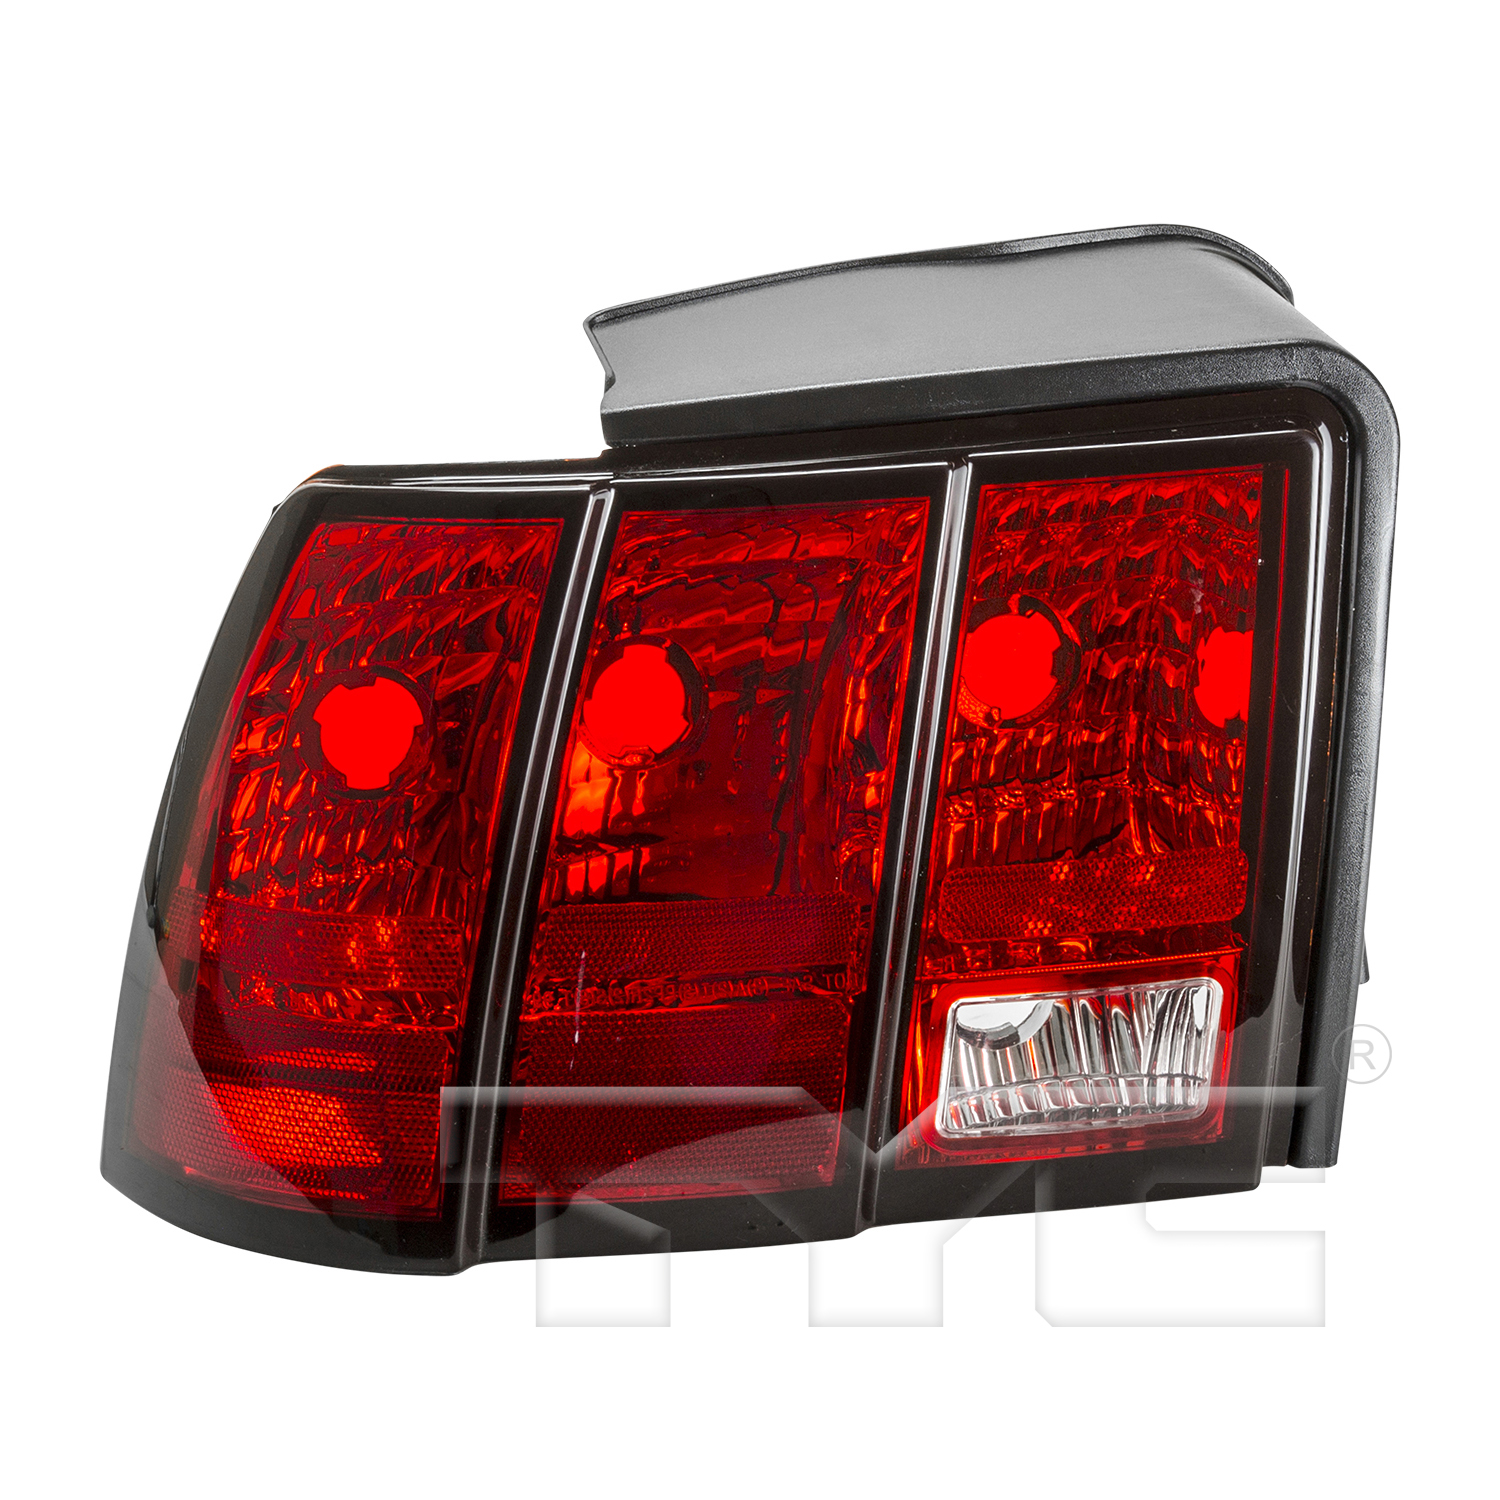 Aftermarket TAILLIGHTS for FORD - MUSTANG, MUSTANG,99-04,LT Taillamp lens/housing